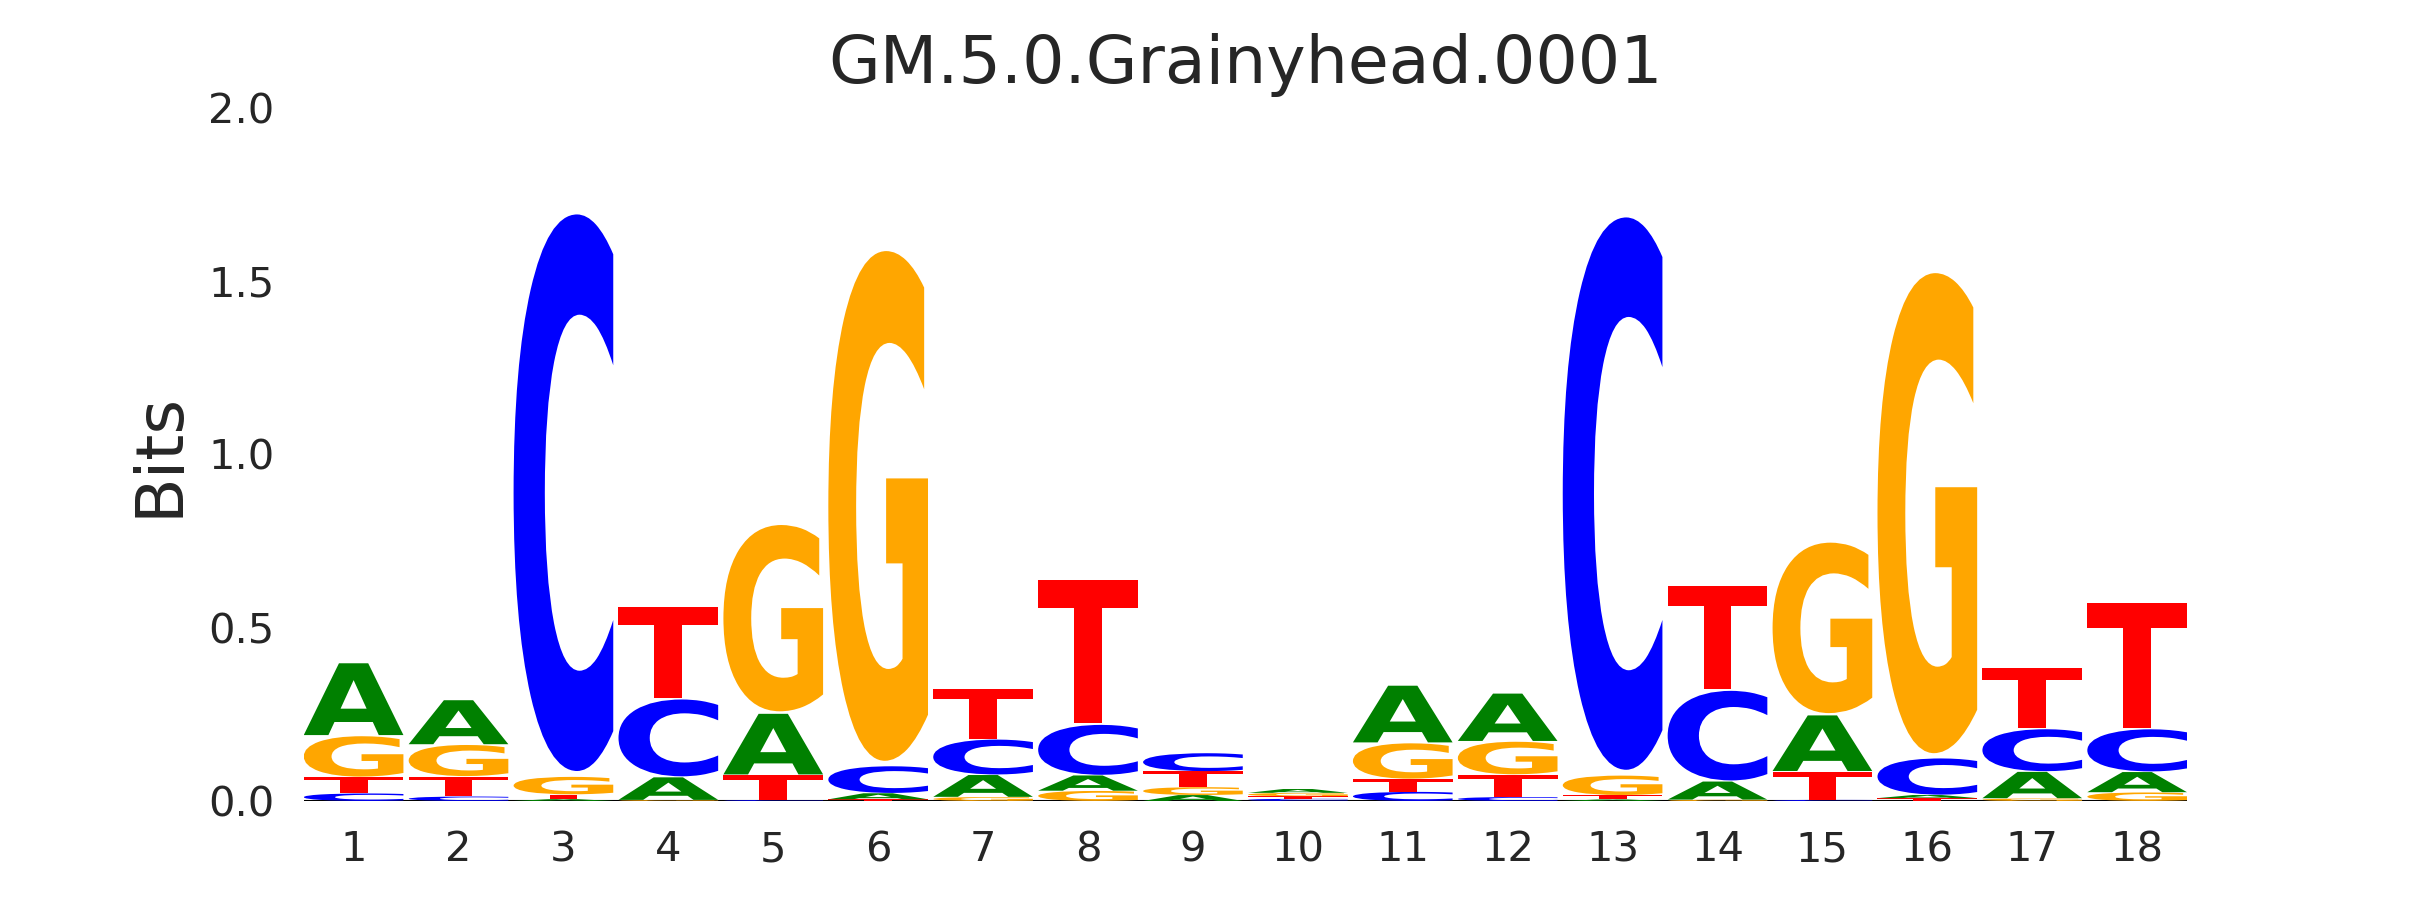 _images/GM.5.0.Grainyhead.0001.png